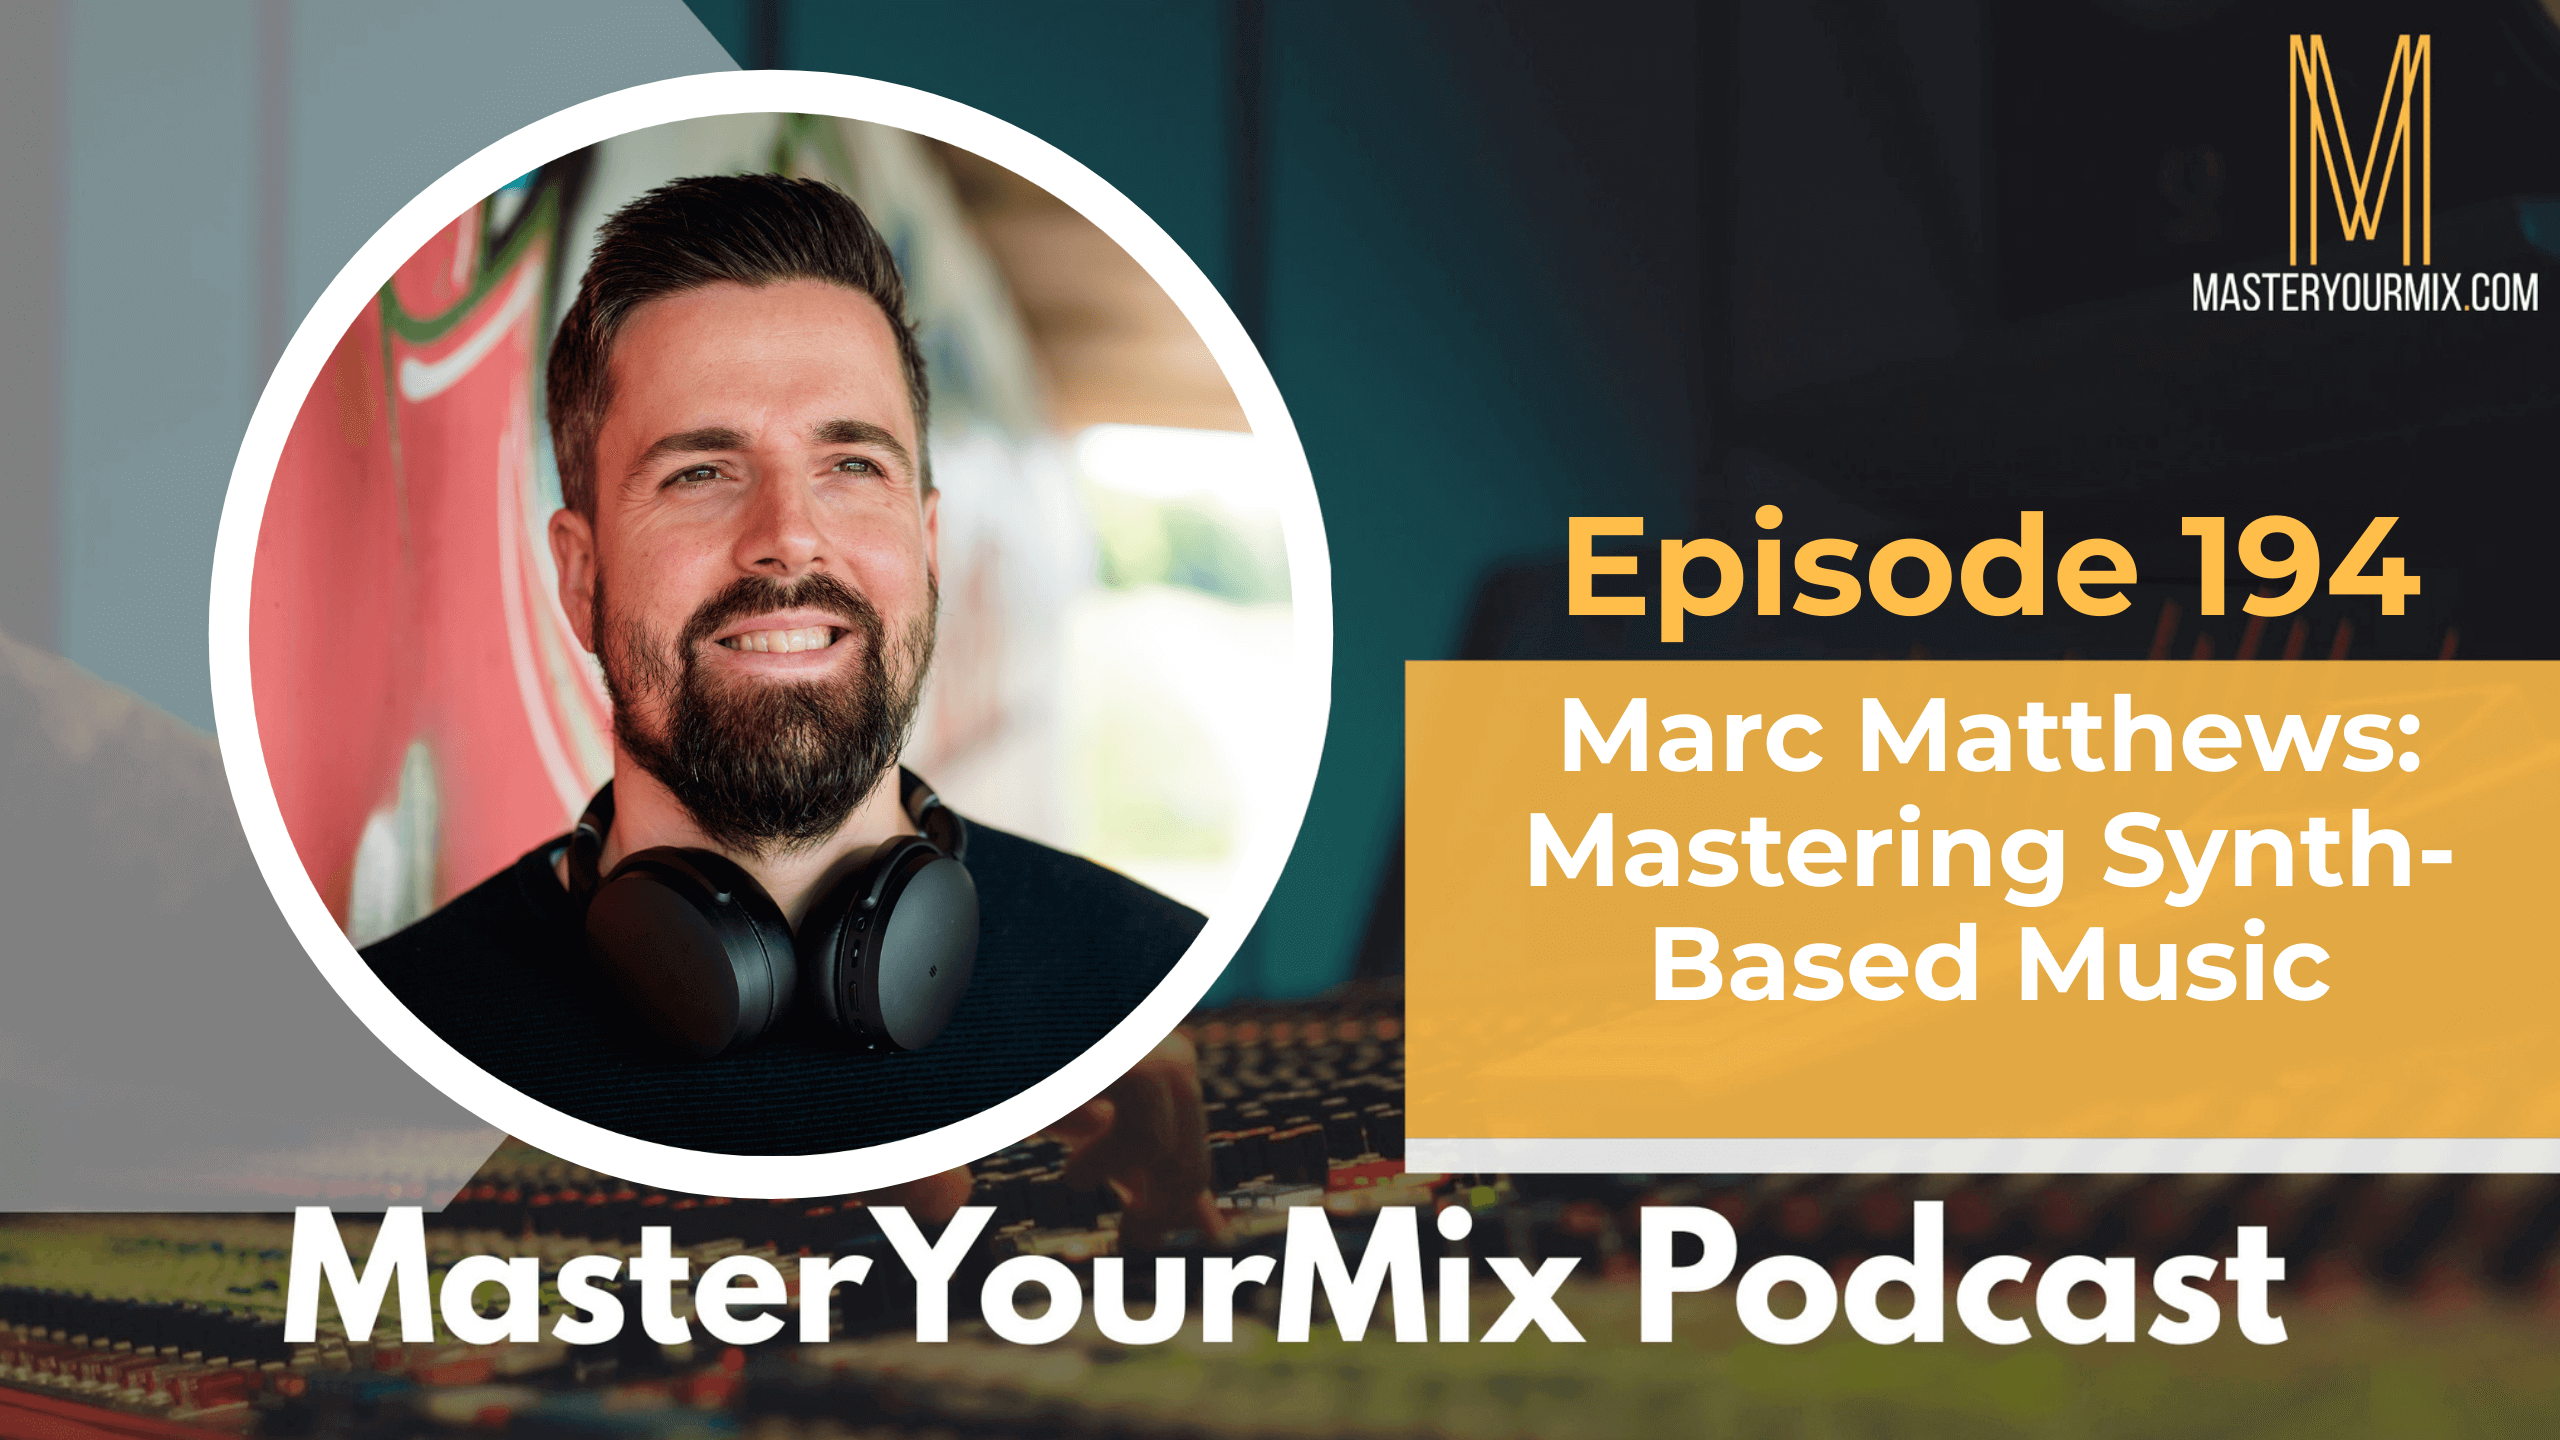 master your mix podcast, ep 194 marc matthews